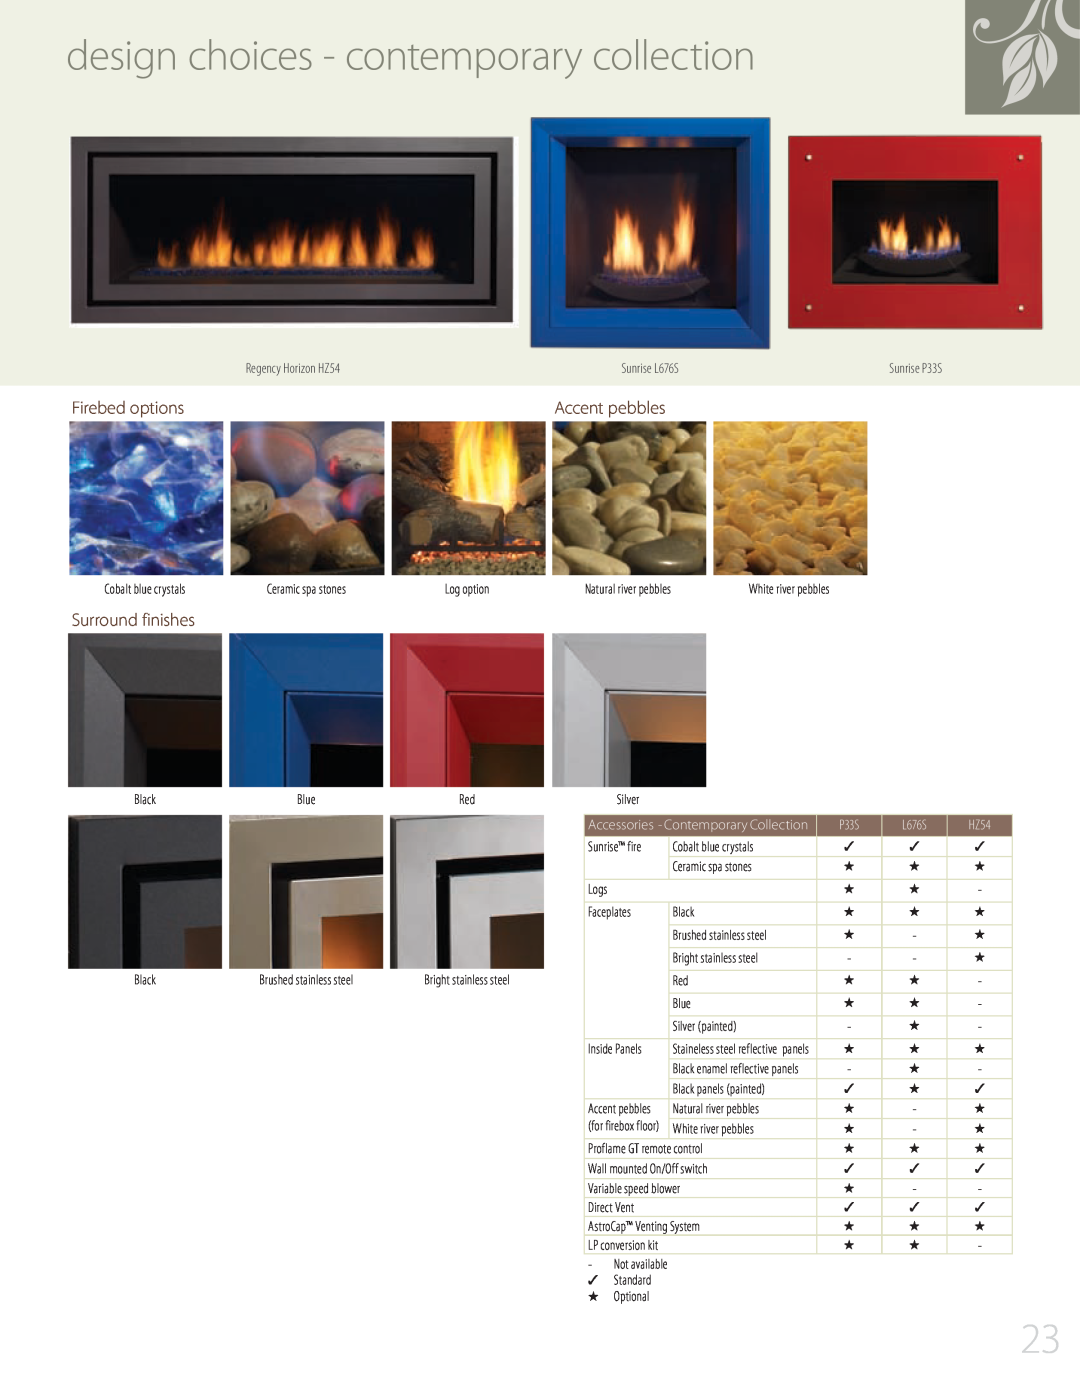 Regency P36, P90 design choices - contemporary collection, Firebed options, Accent pebbles, Surround finishes, P33S, L676S 